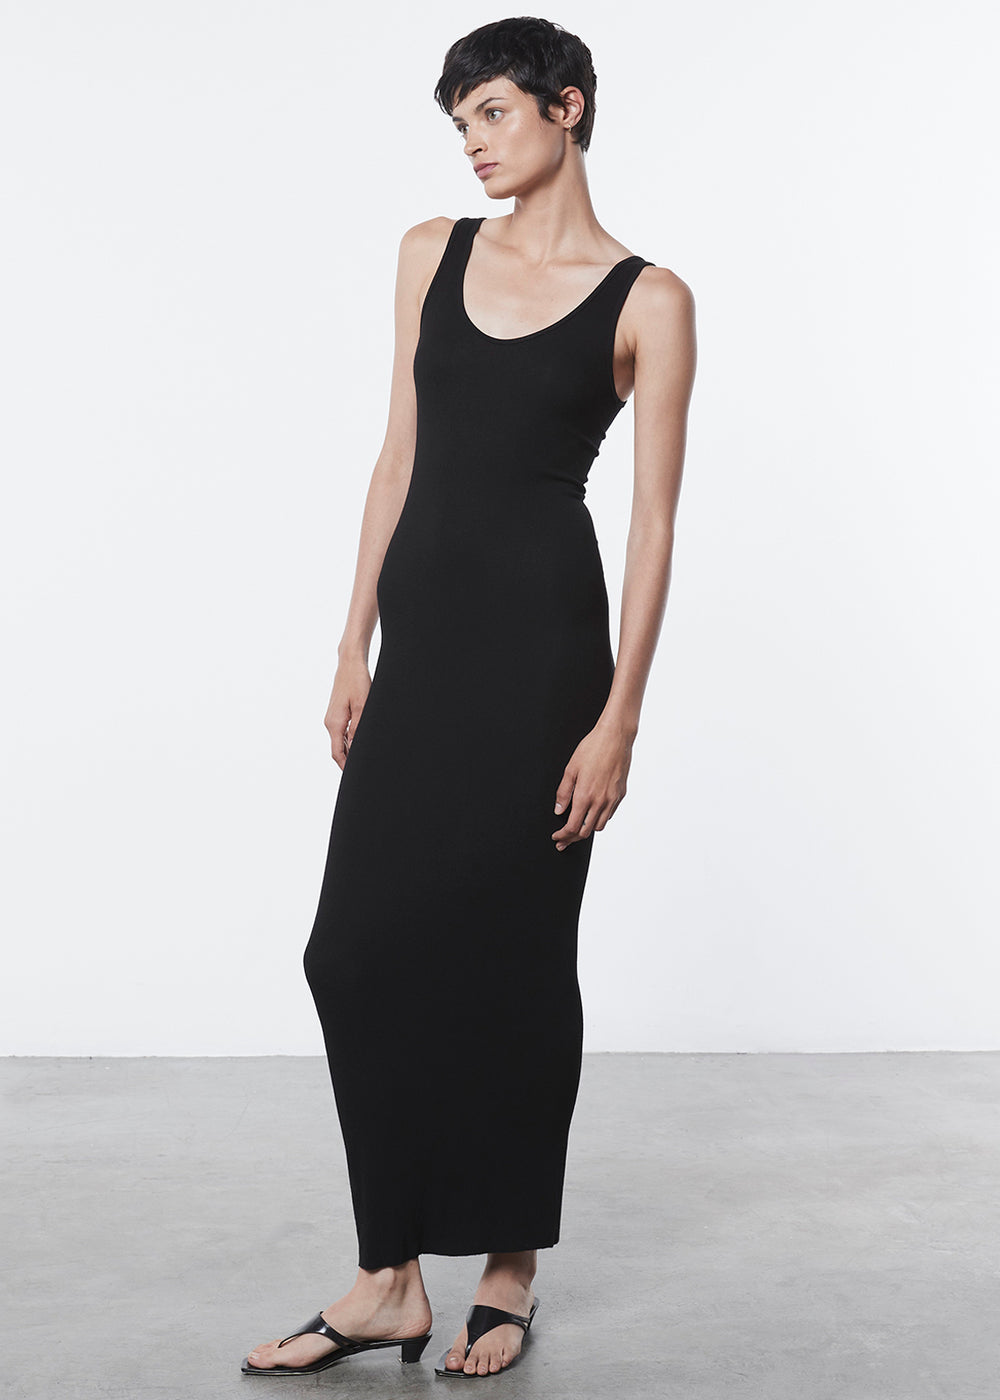 Enza Costa Stretch Silk Knit Maxi Tank Dress Black-Dresses-West of Woodward Boutique-Vancouver-Canada